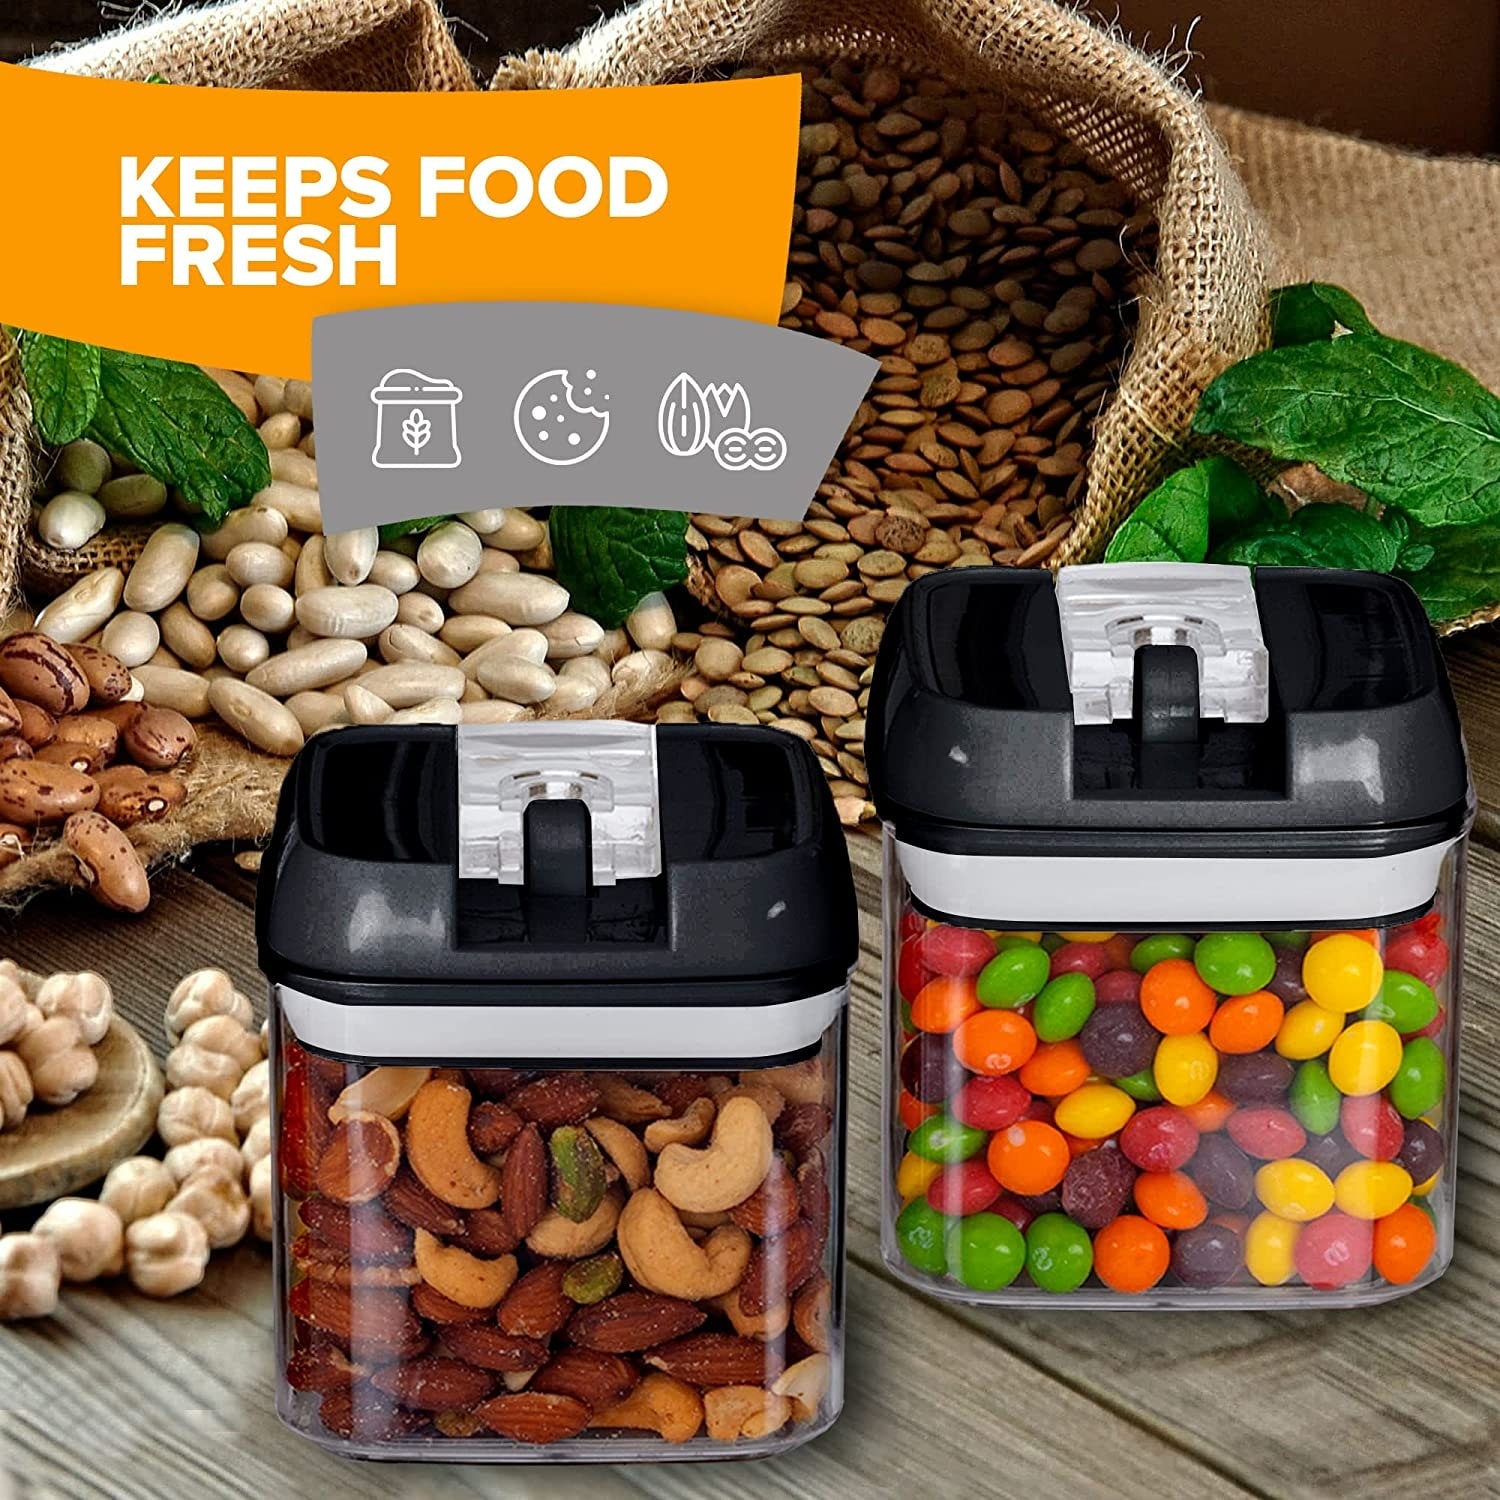 https://ak1.ostkcdn.com/images/products/is/images/direct/b738df74f3cd2e378ac4cee2d50a2bfe237efa18/Cheer-Collection-Set-of-12-Uniform-Size-Airtight-Food-Storage-Containers.jpg